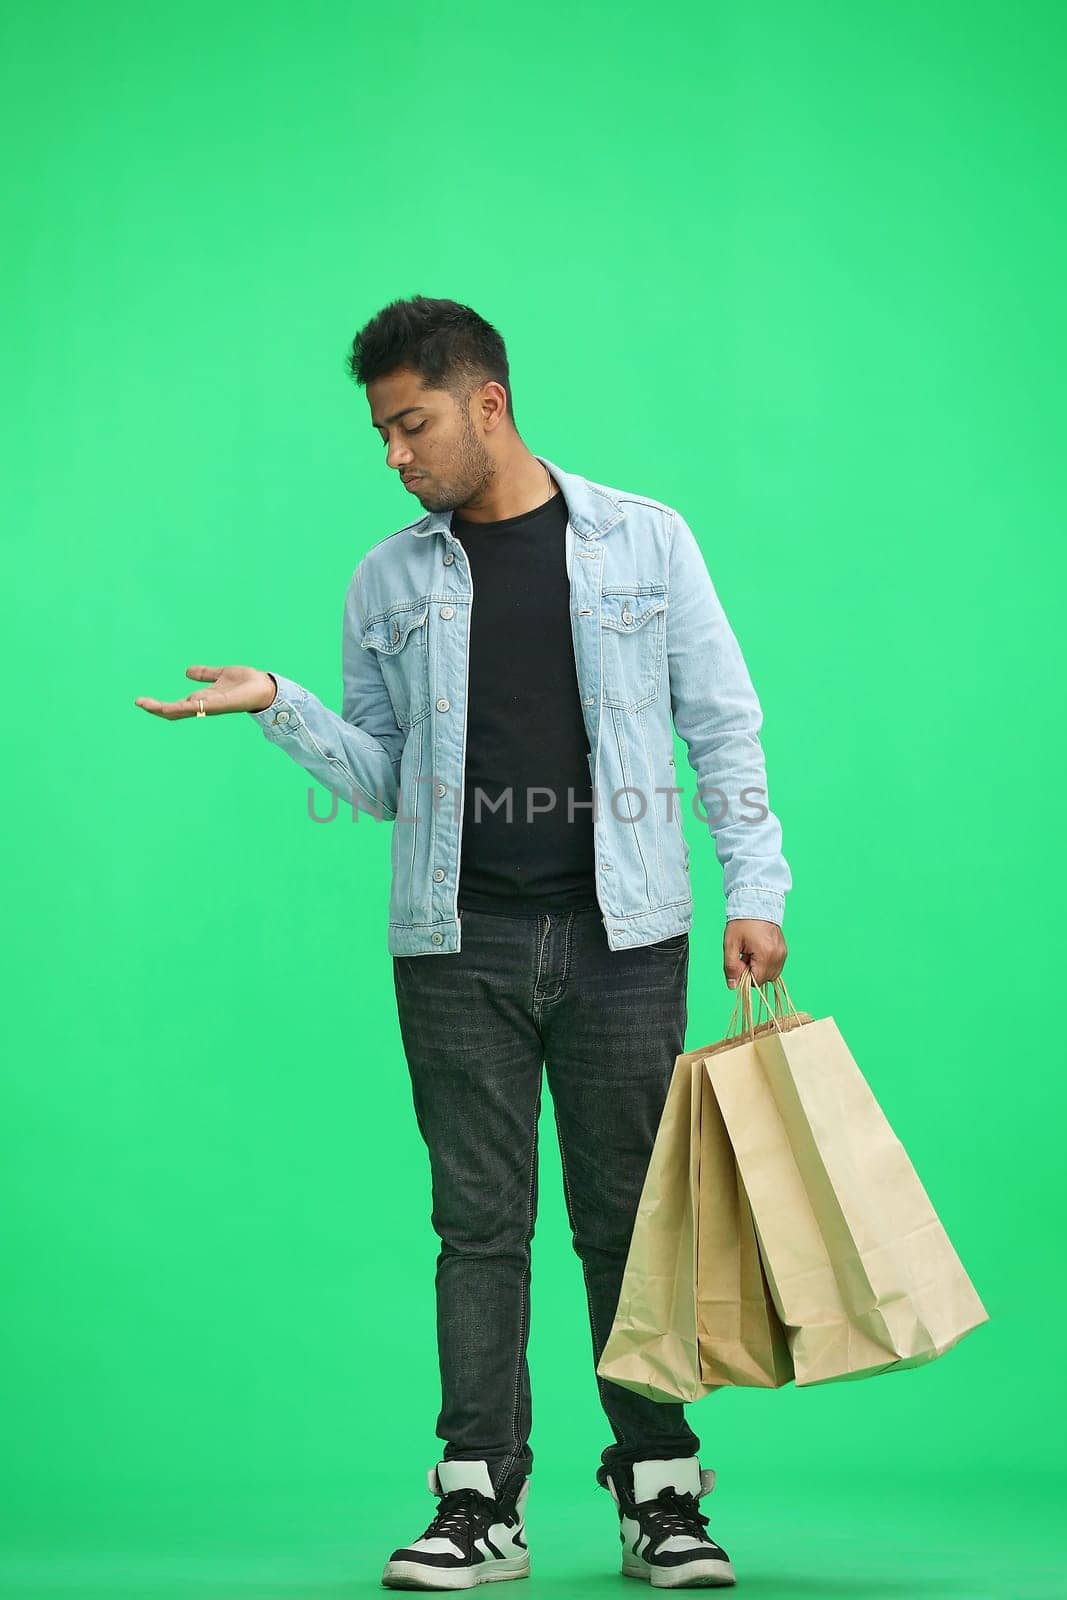 Man on a green background with shoppers point side.